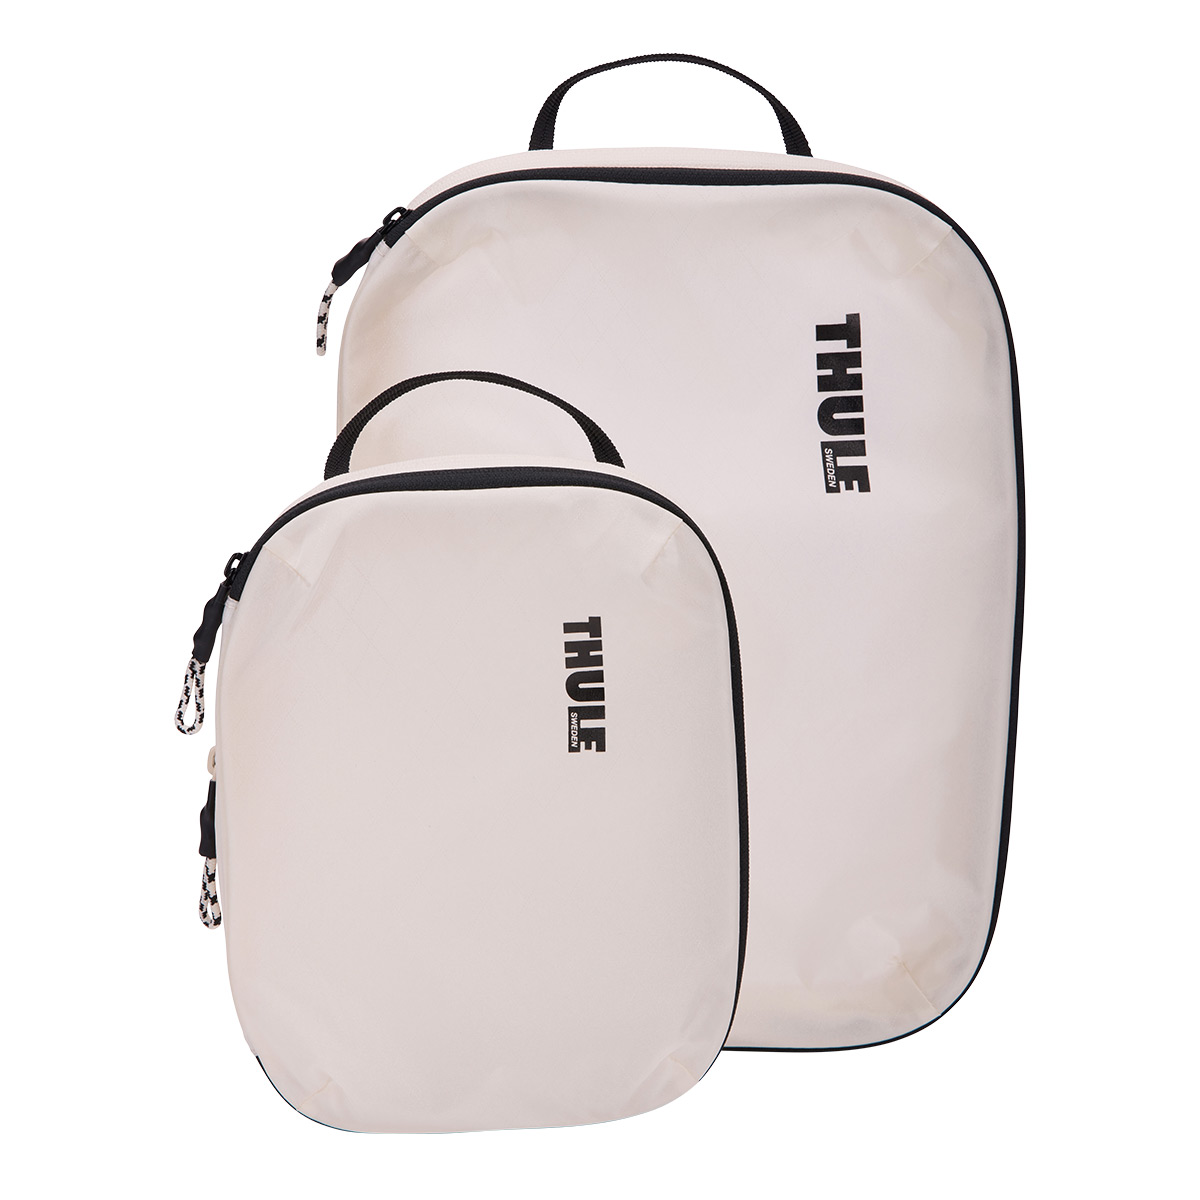 https://www.containerstore.com/catalogimages/500433/10097128-Thule_Compression_Packing_C.jpg